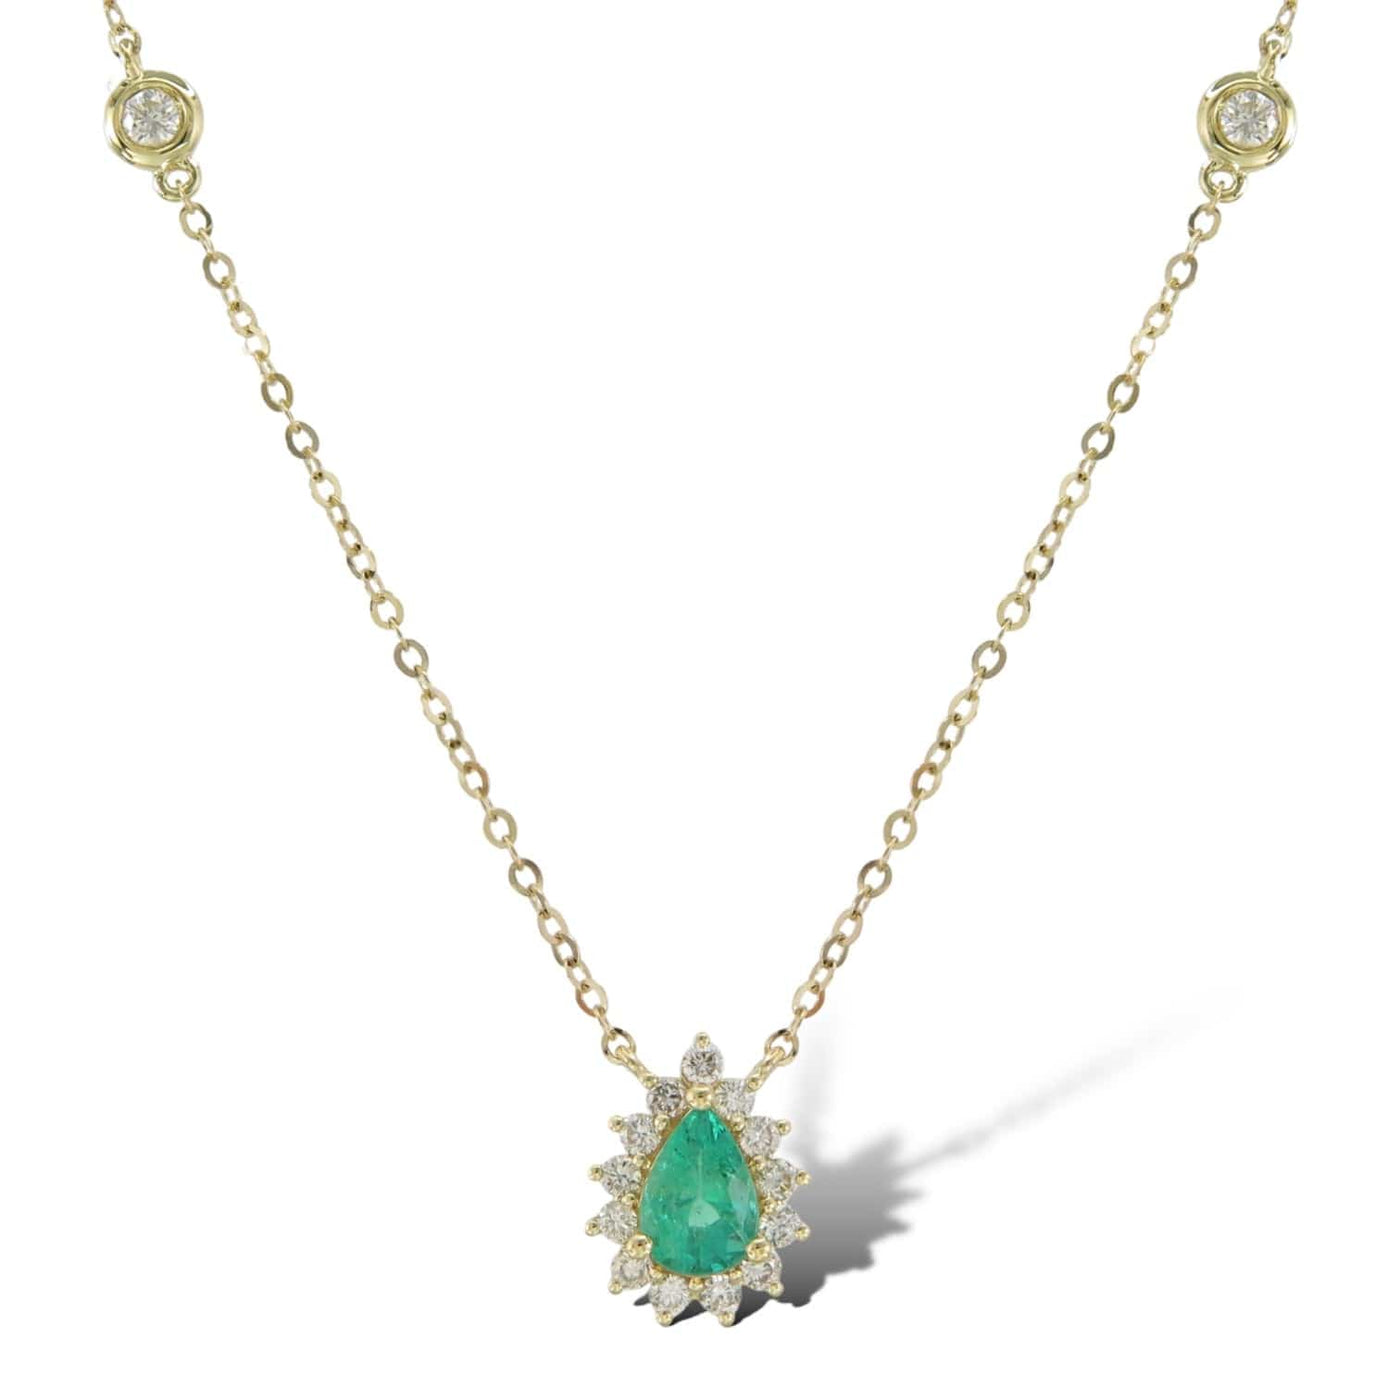 PEAR SHAPED DIANA PENDANT WITH EMERALD AND DIAMONDS